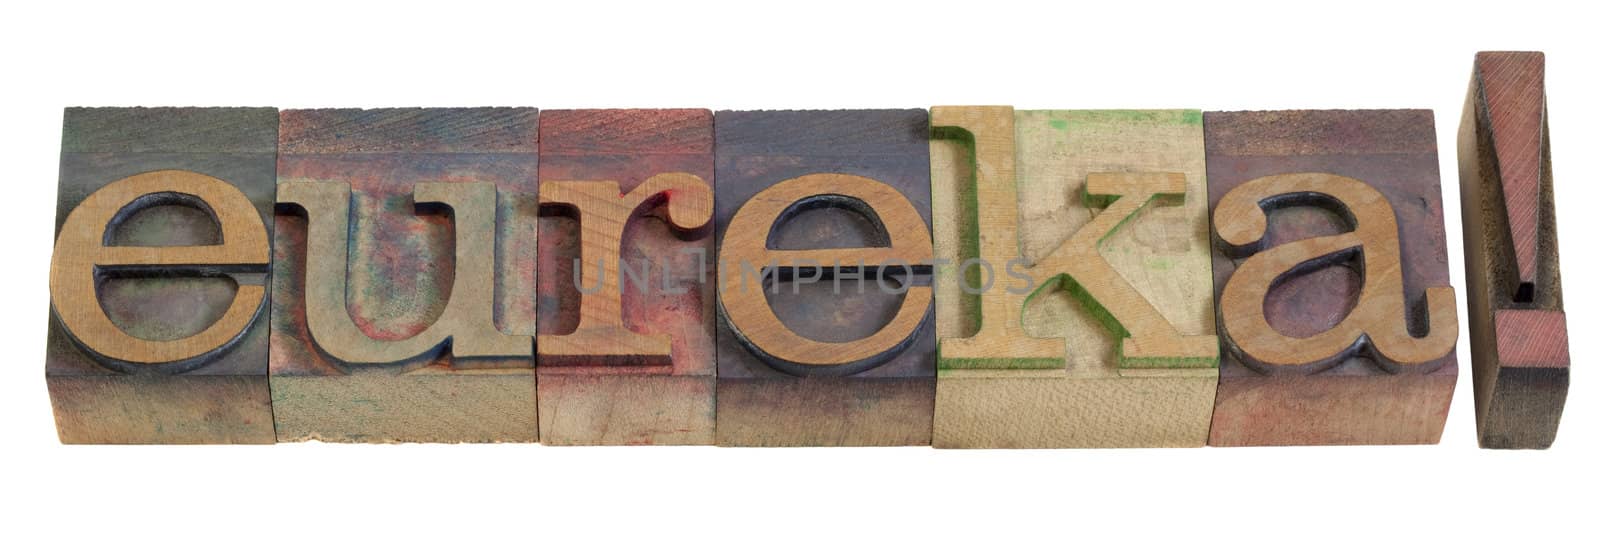 eureka - discovery or illumination concept, famous exclamation attributed to Archimedes -  vintage wooden letterpress printing blocks, stained by color inks, isolated on white